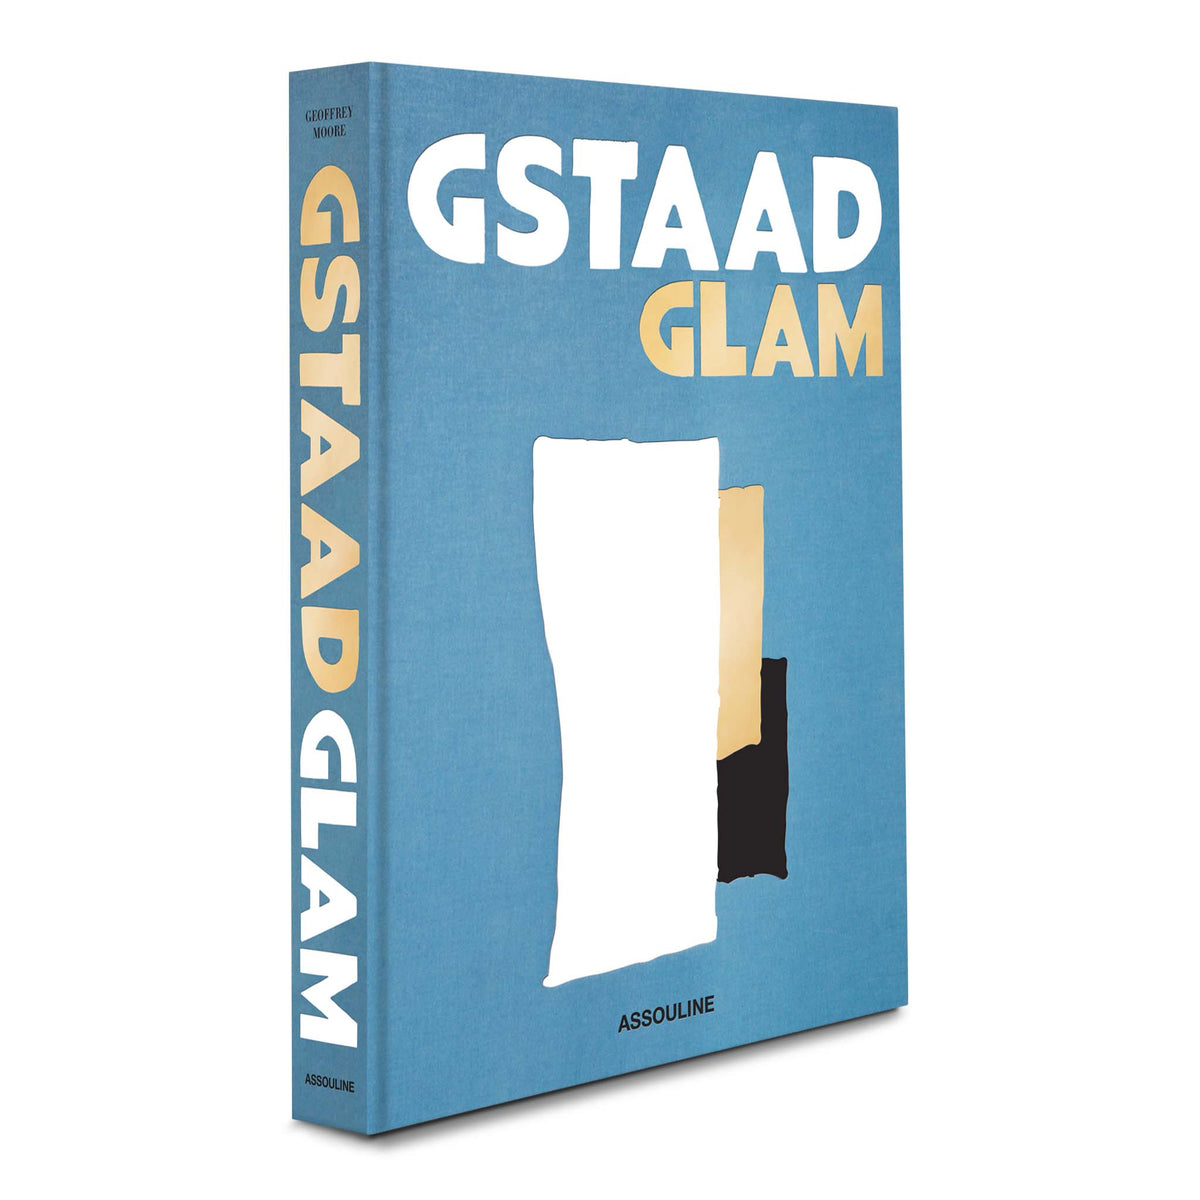 "Gstaad Glam"